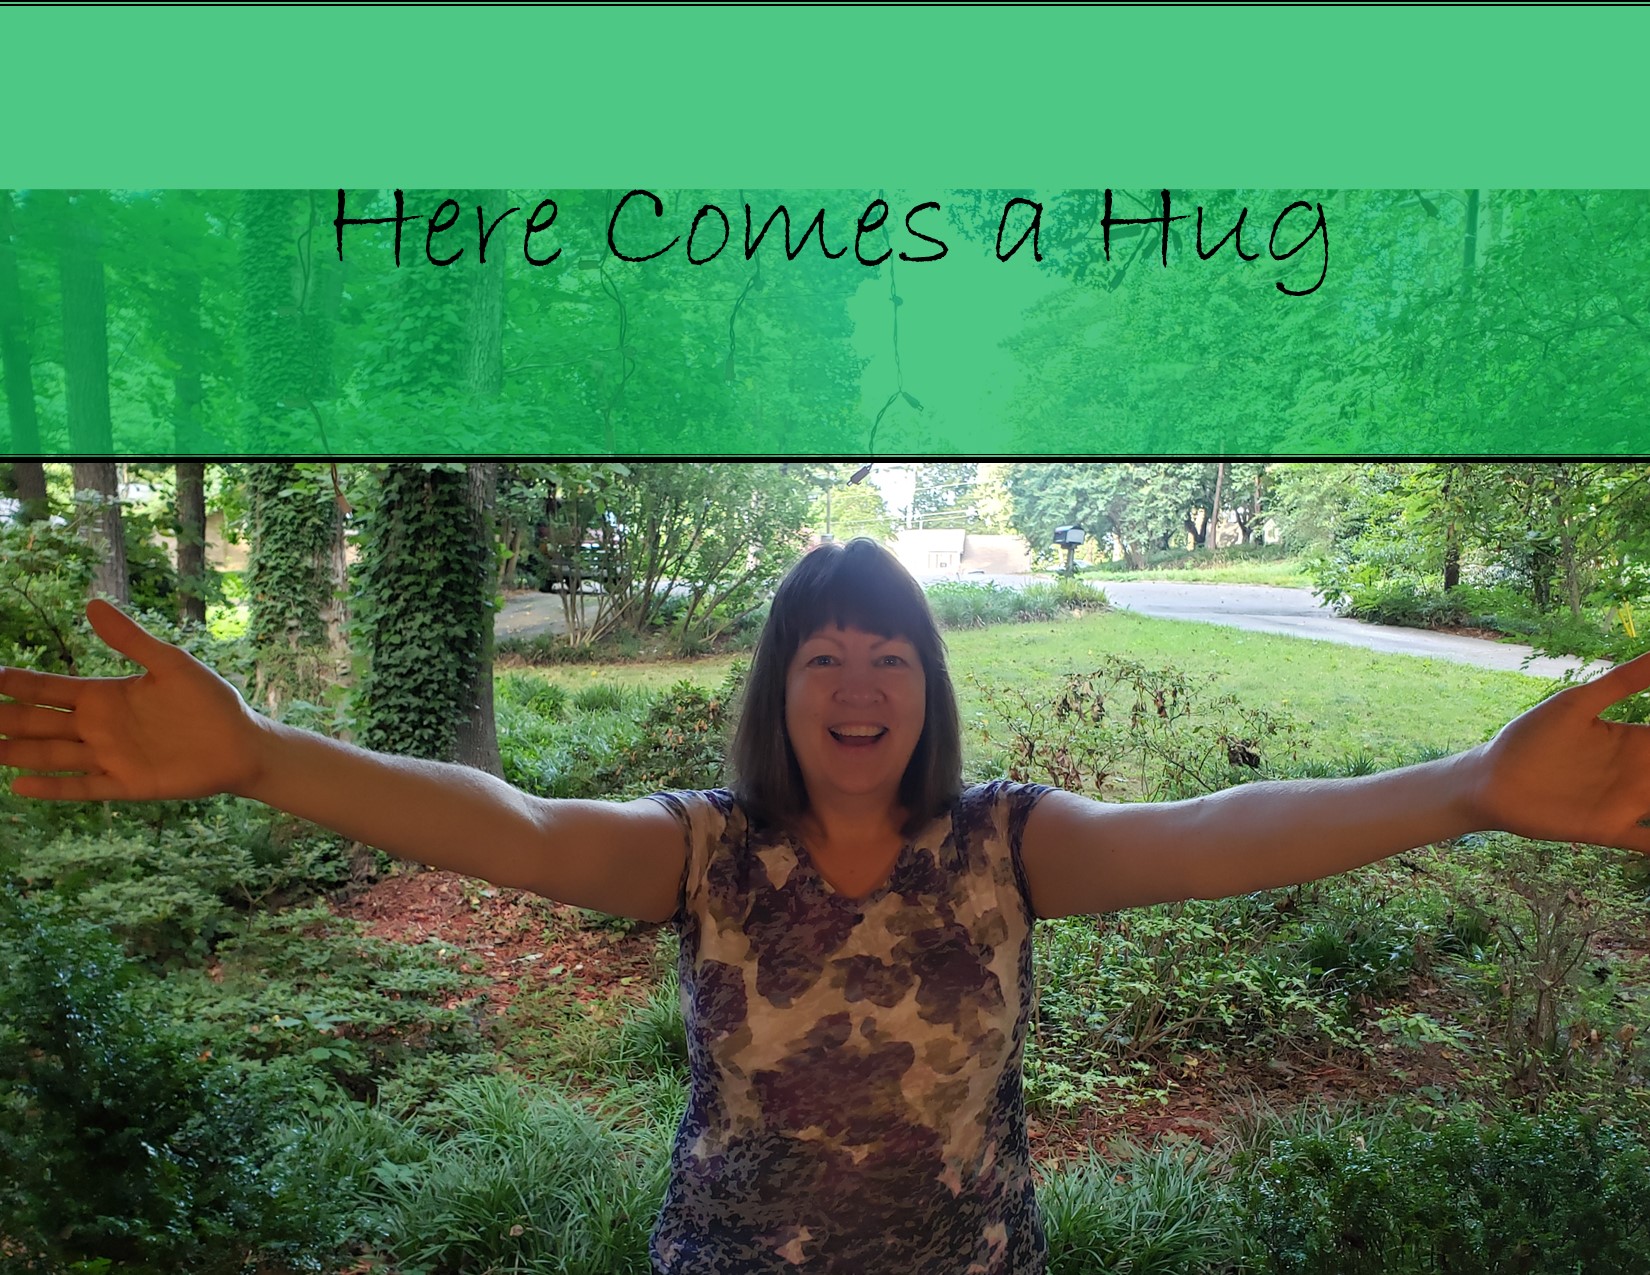 Here Comes a Hug (thank you, The Beatles!)